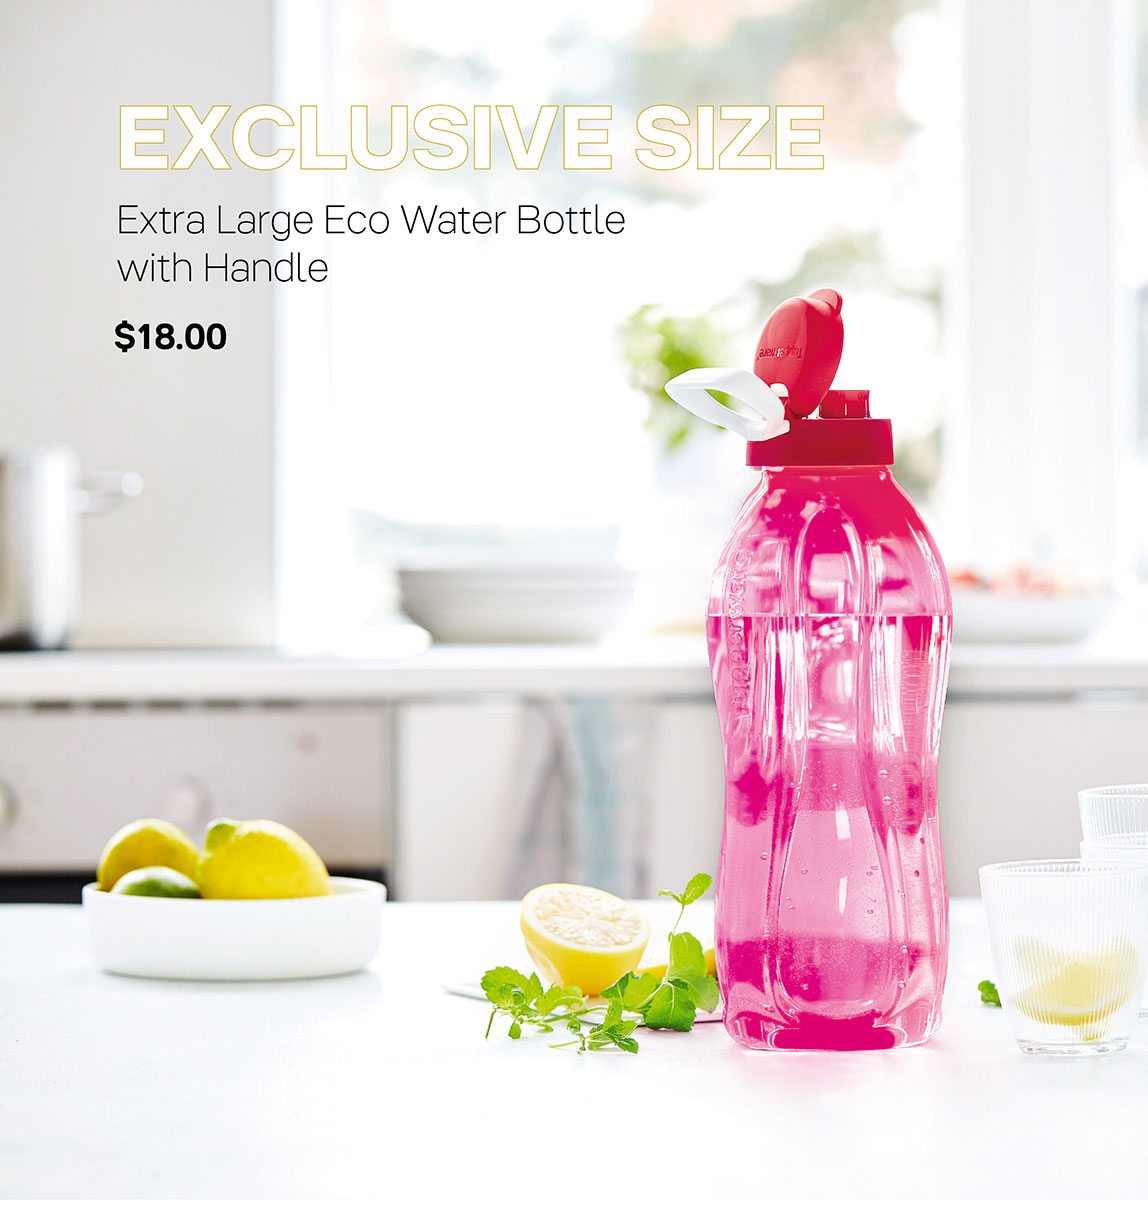 Extra Large Eco Water Bottle with Handle